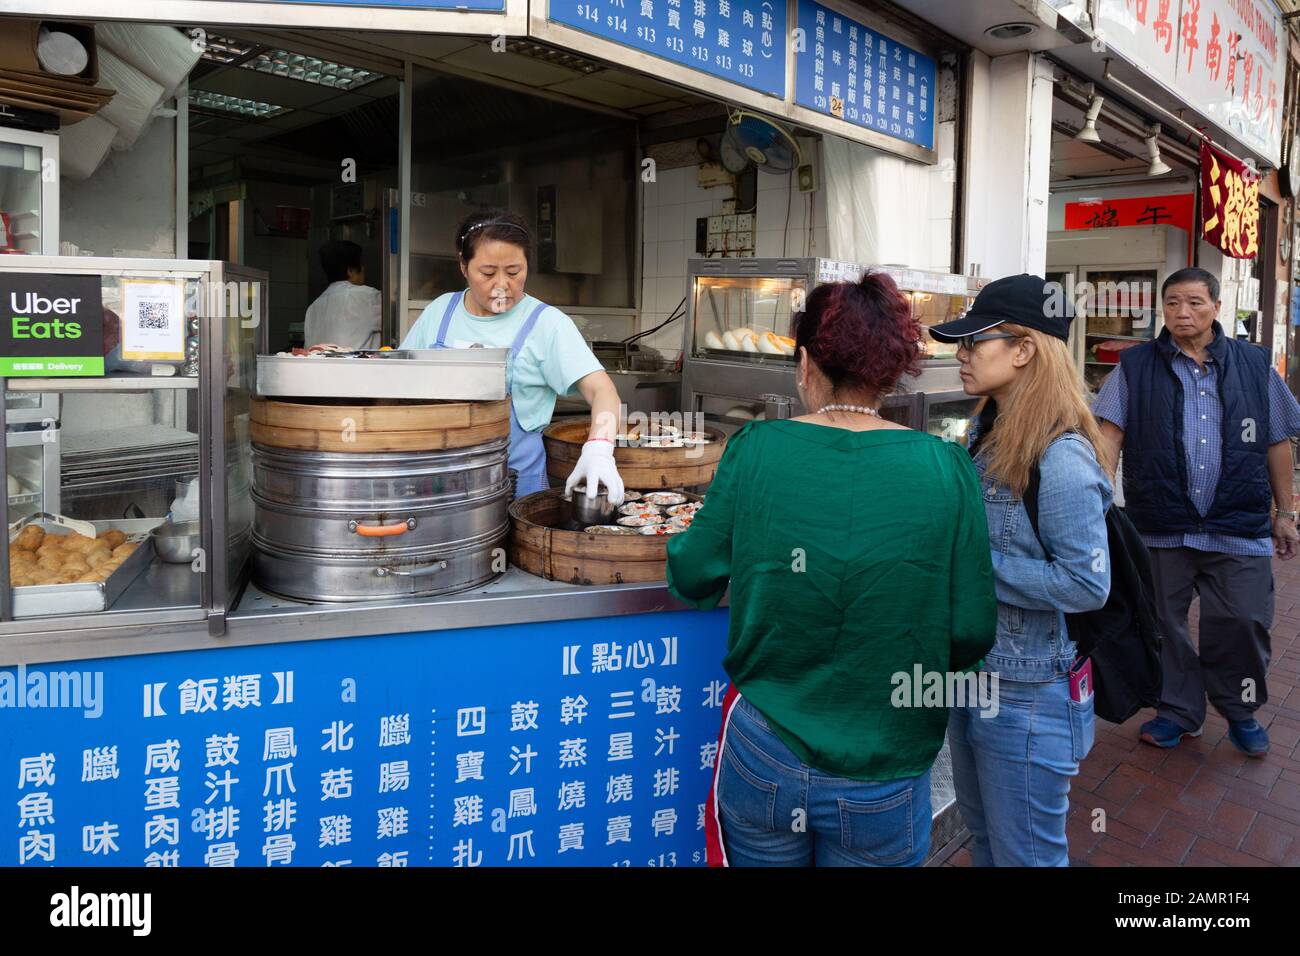 Asia street food; people buying food at a street stall, Kowloon, Hong Kong Asia - example of Asian lifestyle Stock Photo